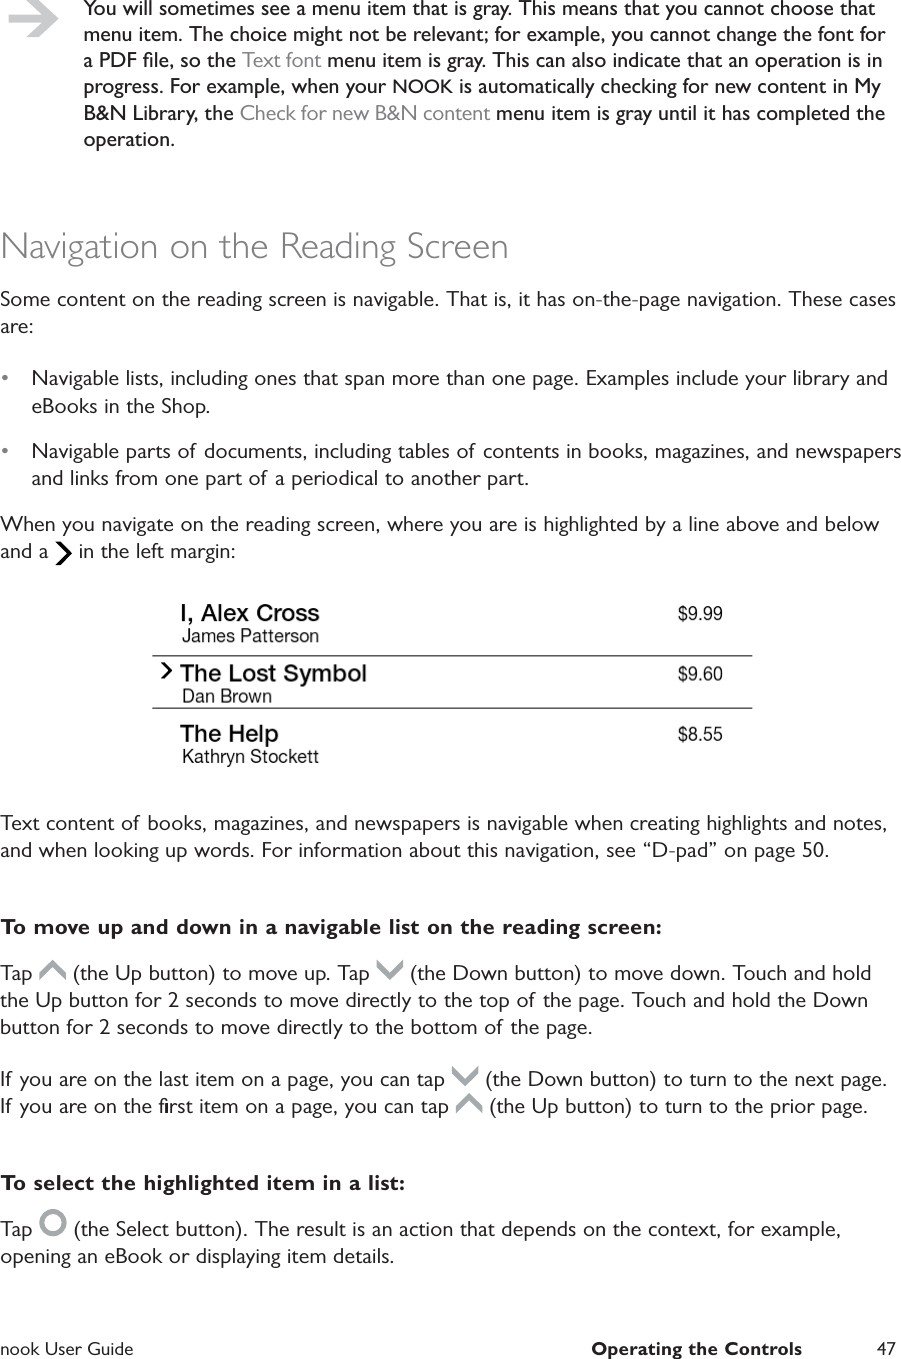  nook User Guide  Operating the Controls 47You will sometimes see a menu item that is gray. This means that you cannot choose that menu item. The choice might not be relevant; for example, you cannot change the font for a PDF ﬁle, so the Text font menu item is gray. This can also indicate that an operation is in progress. For example, when your NOOK is automatically checking for new content in My B&amp;N Library, the Check for new B&amp;N content menu item is gray until it has completed the operation.Navigation on the Reading ScreenSome content on the reading screen is navigable. That is, it has on-the-page navigation. These cases are:•  Navigable lists, including ones that span more than one page. Examples include your library and eBooks in the Shop.•  Navigable parts of documents, including tables of contents in books, magazines, and newspapers and links from one part of a periodical to another part.When you navigate on the reading screen, where you are is highlighted by a line above and below and a   in the left margin:Text content of books, magazines, and newspapers is navigable when creating highlights and notes, and when looking up words. For information about this navigation, see “D-pad” on page 50.To move up and down in a navigable list on the reading screen:Tap   (the Up button) to move up. Tap   (the Down button) to move down. Touch and hold the Up button for 2 seconds to move directly to the top of  the page. Touch and hold the Down button for 2 seconds to move directly to the bottom of the page.If you are on the last item on a page, you can tap   (the Down button) to turn to the next page. If you are on the ﬁrst item on a page, you can tap   (the Up button) to turn to the prior page.To select the highlighted item in a list:Tap   (the Select button). The result is an action that depends on the context, for example, opening an eBook or displaying item details.